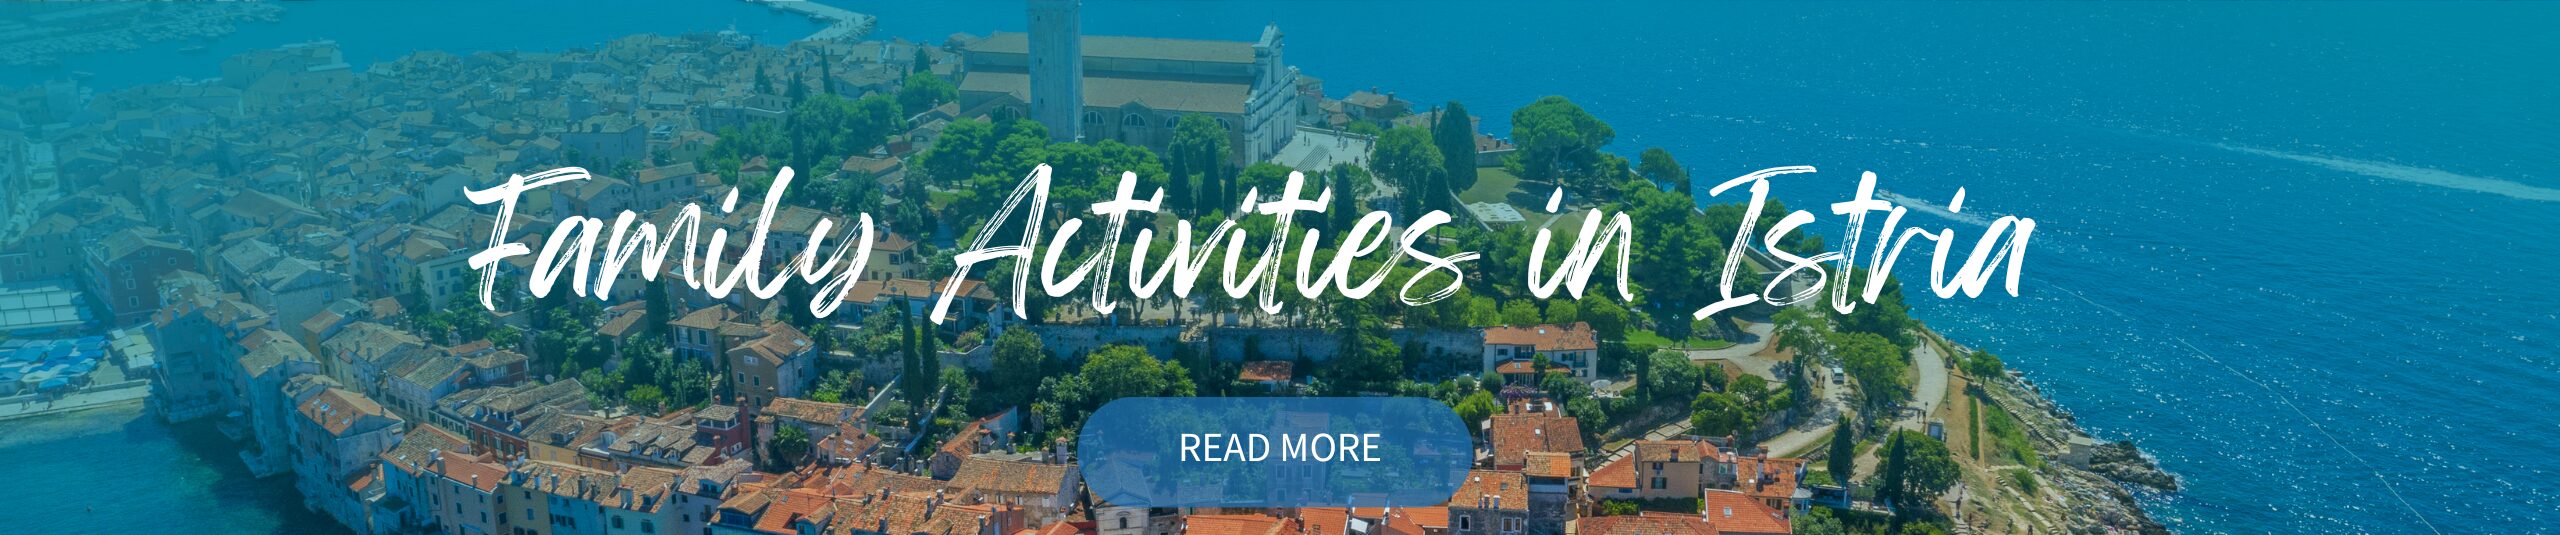 Family Activities in istria blog The Villa Agency